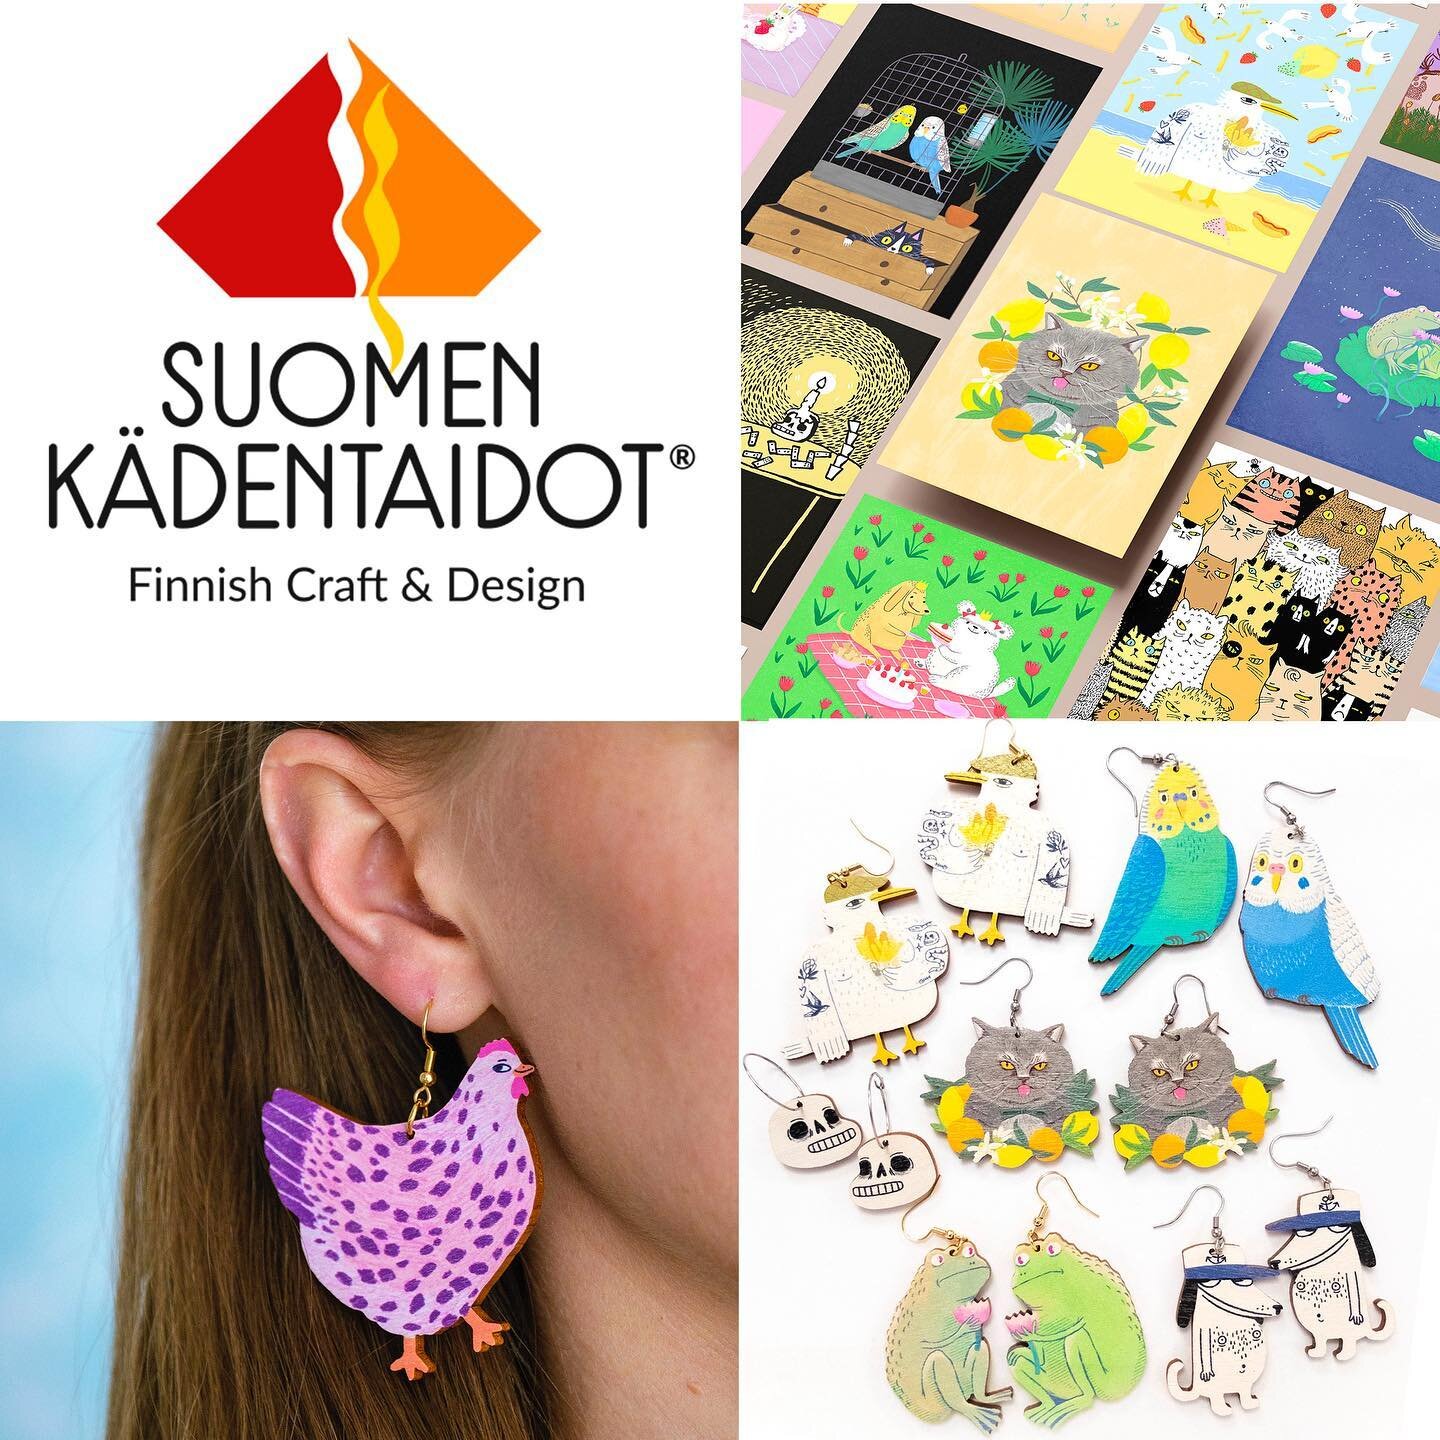 🌟We are in!🌟
Taking part in Suomen k&auml;dentaidot - the biggest art and craft fair in Finland 17-19.11.2013 🌟
Come see us at booth C939 where you will also find the amazing ceramics, art and illustrated products by @eviannaester 😍
.
#suomenk&au